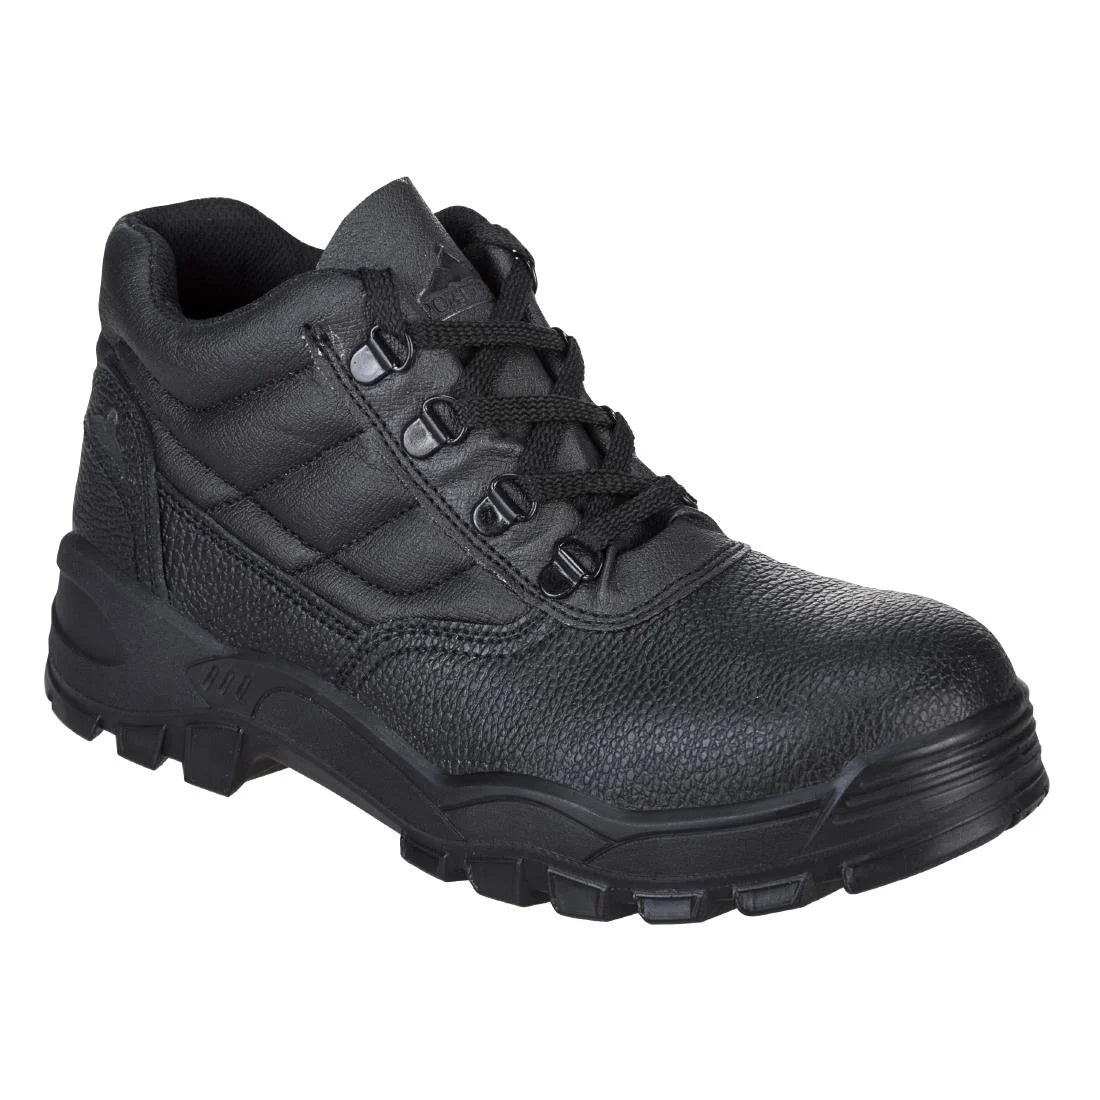 BA059-39 Portwest Protector Boot S1P Black Size 39 JD Catering Equipment Solutions Ltd